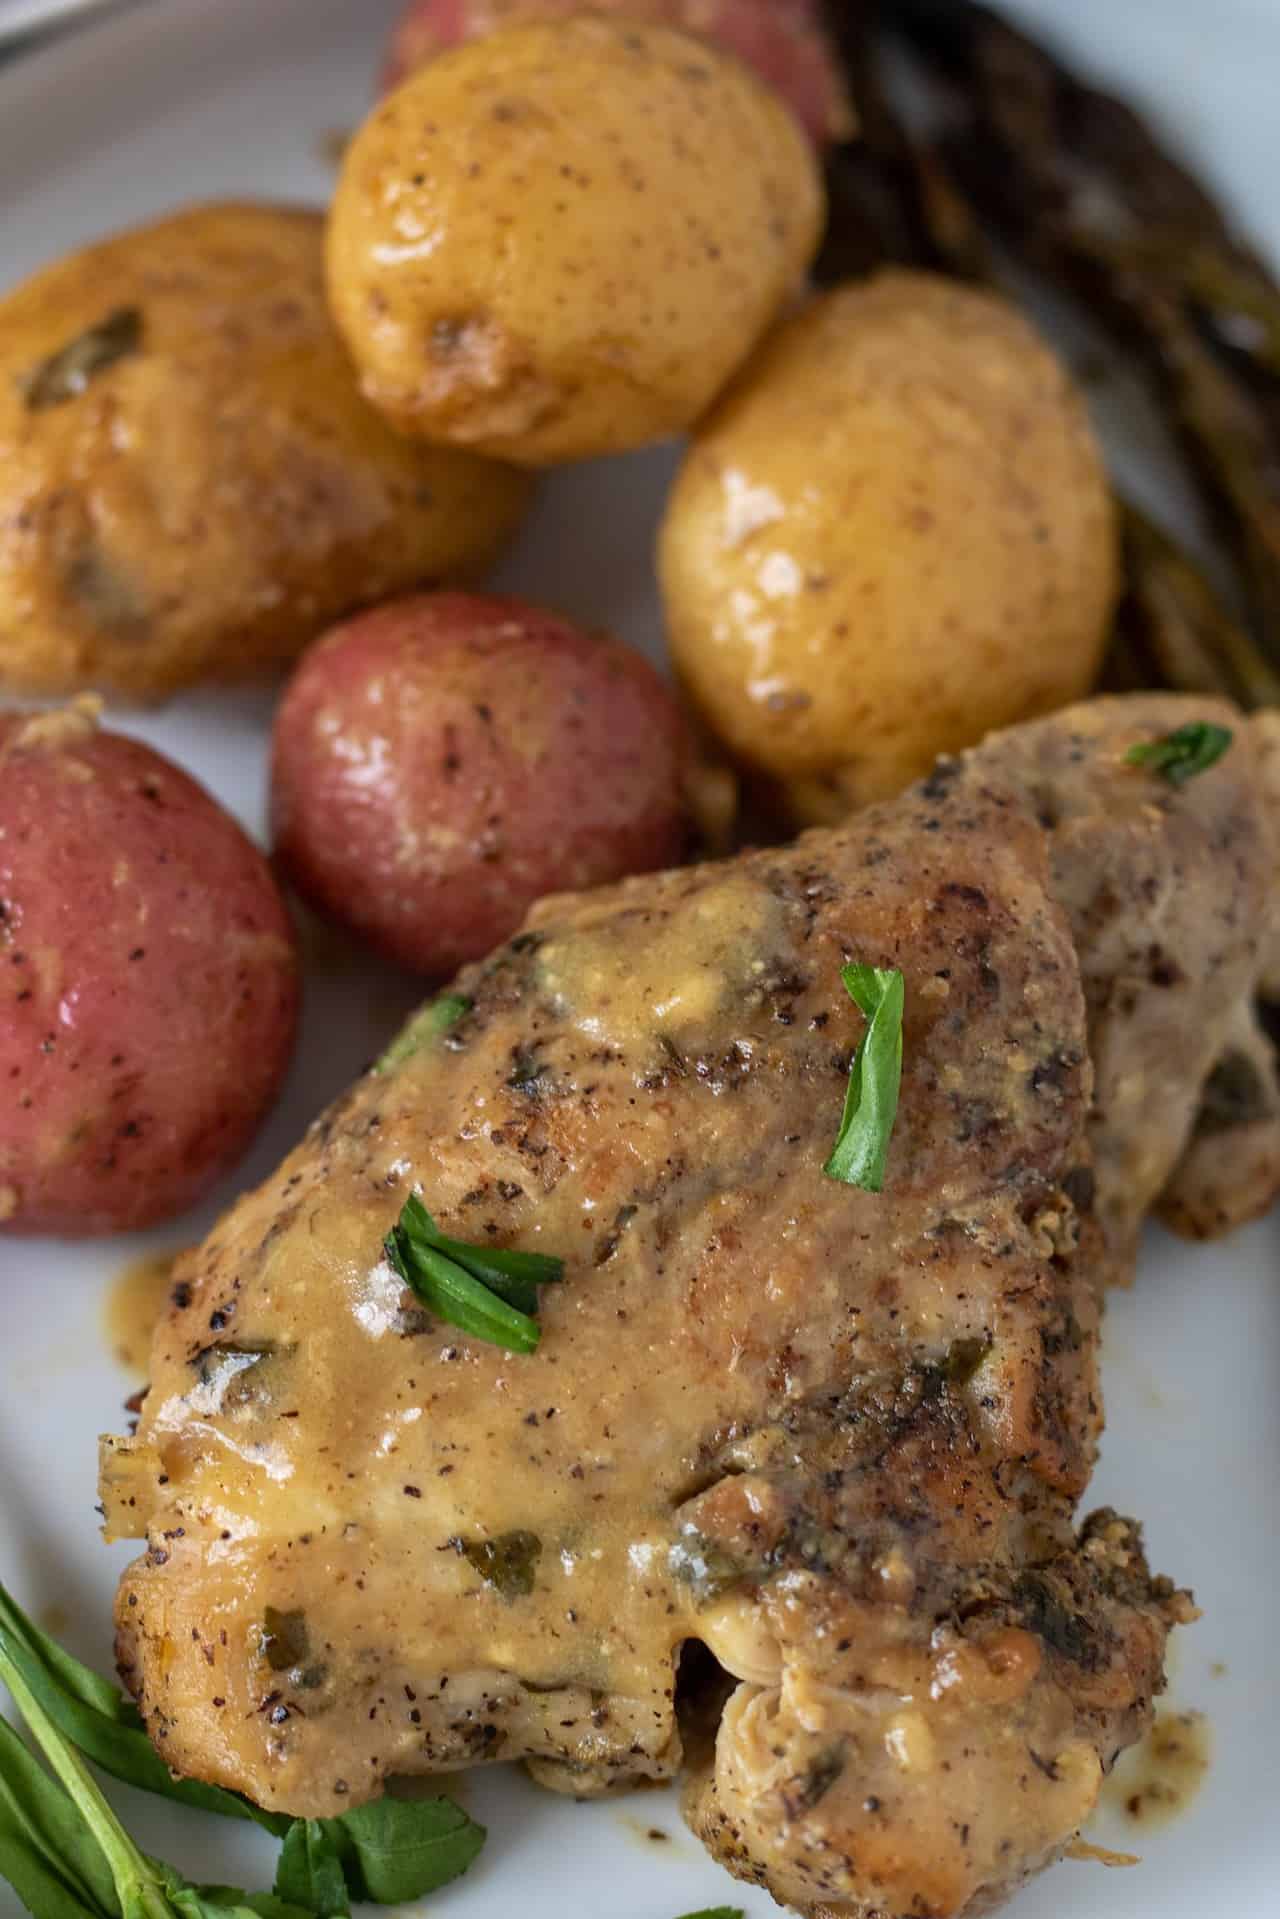 A small white round dish with a browned chicken thigh. It's covered in gravy and topped with fresh tarragon. There's white and red baby potatoes on the plate too.